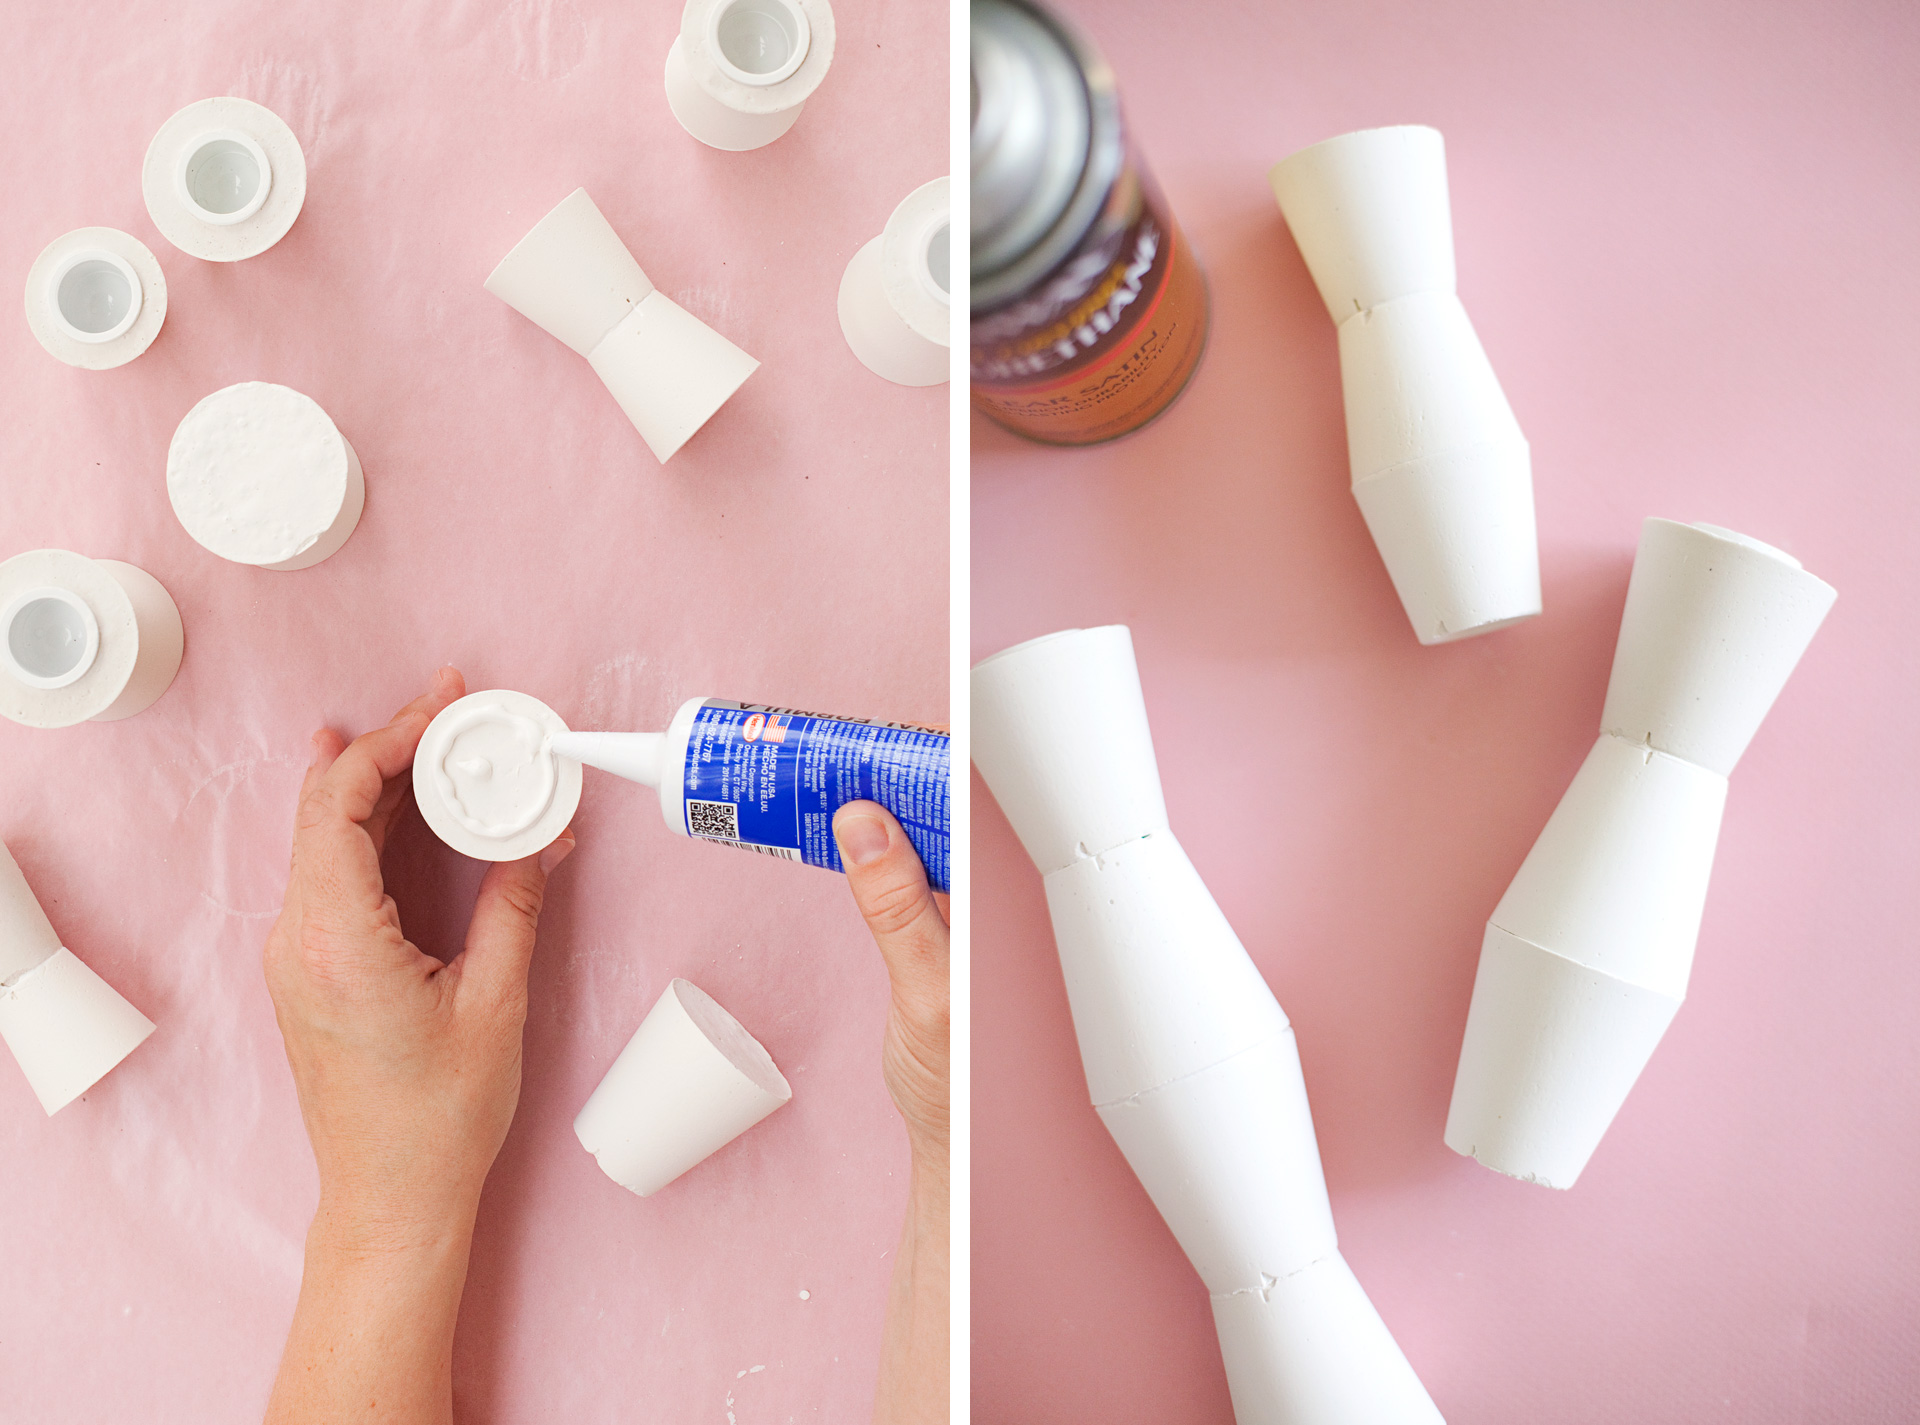 DIY Mid Century Modern Candlestick Holders— made from plaster!